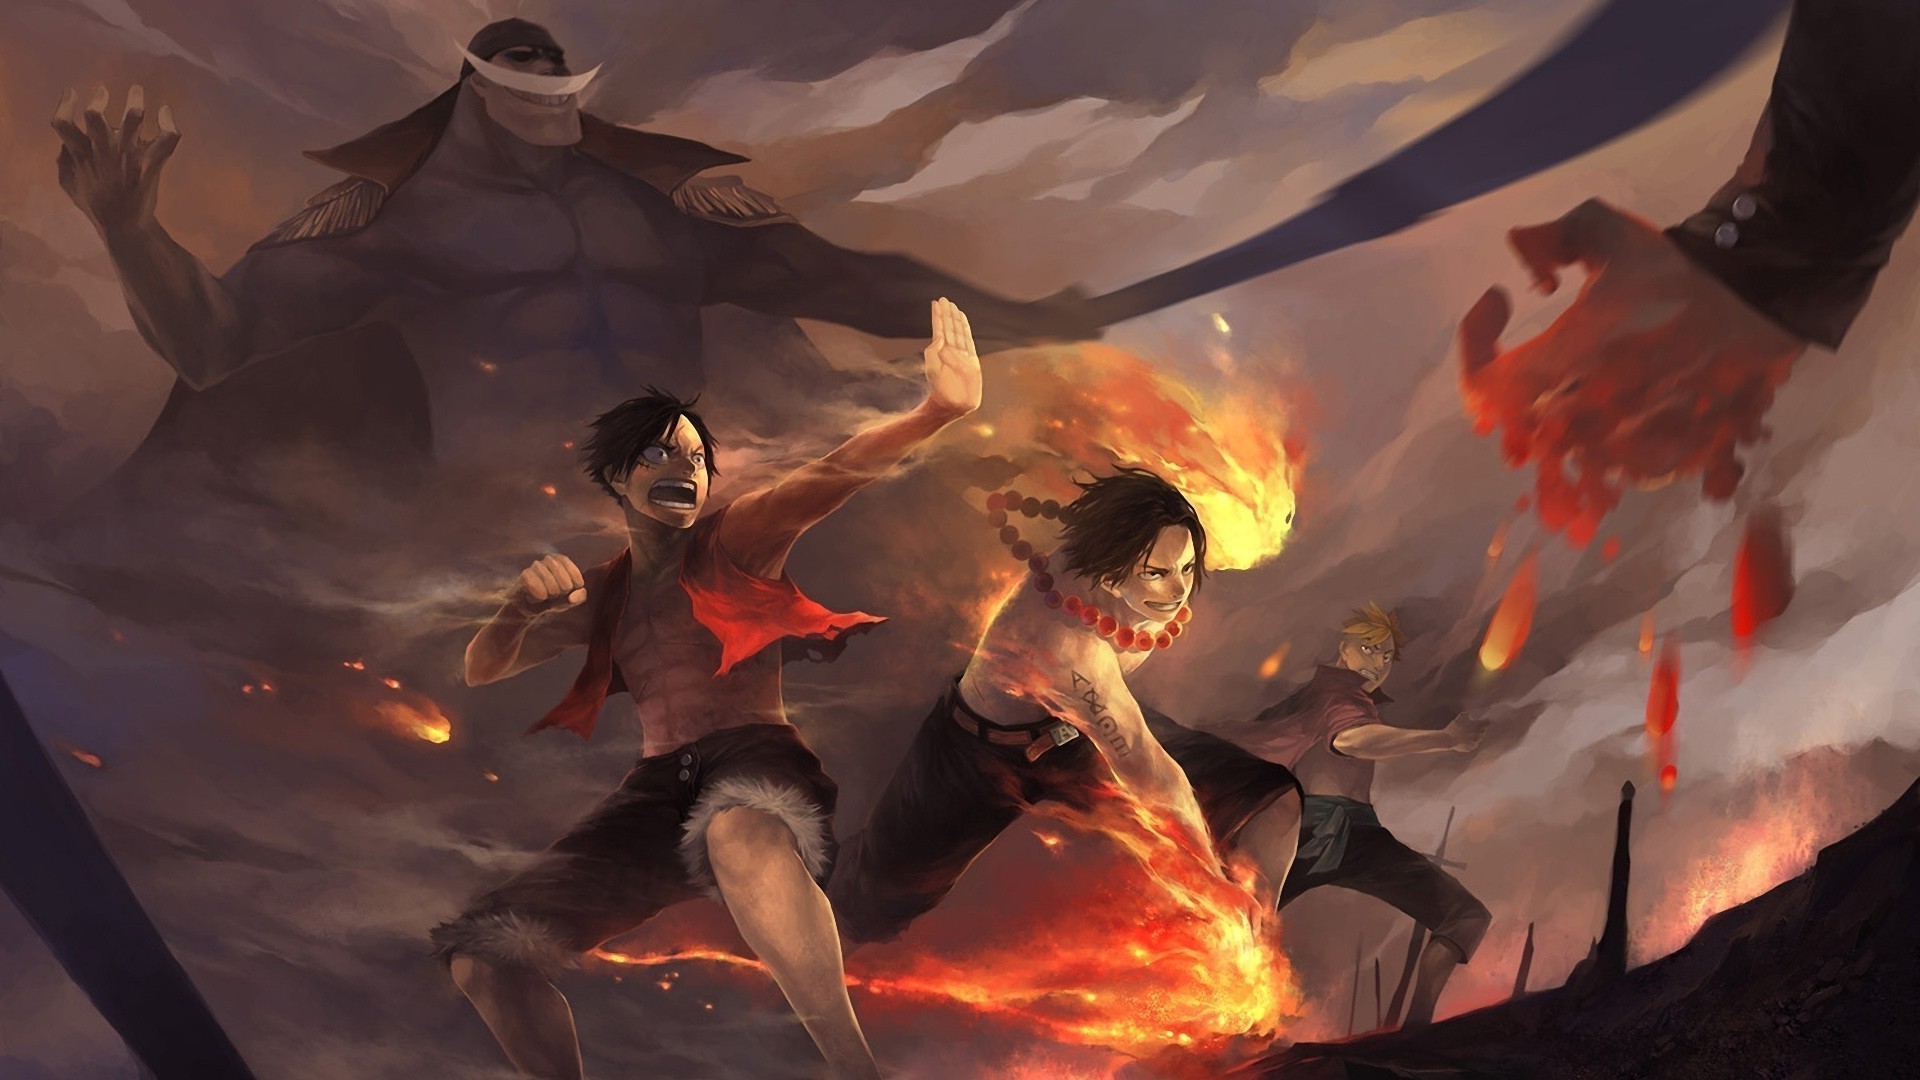 Anime One Piece Monkey D Luffy Portgas D Ace Whitebeard Edward Newgate Marco Wallpapers Hd Desktop And Mobile Backgrounds 1920x1080